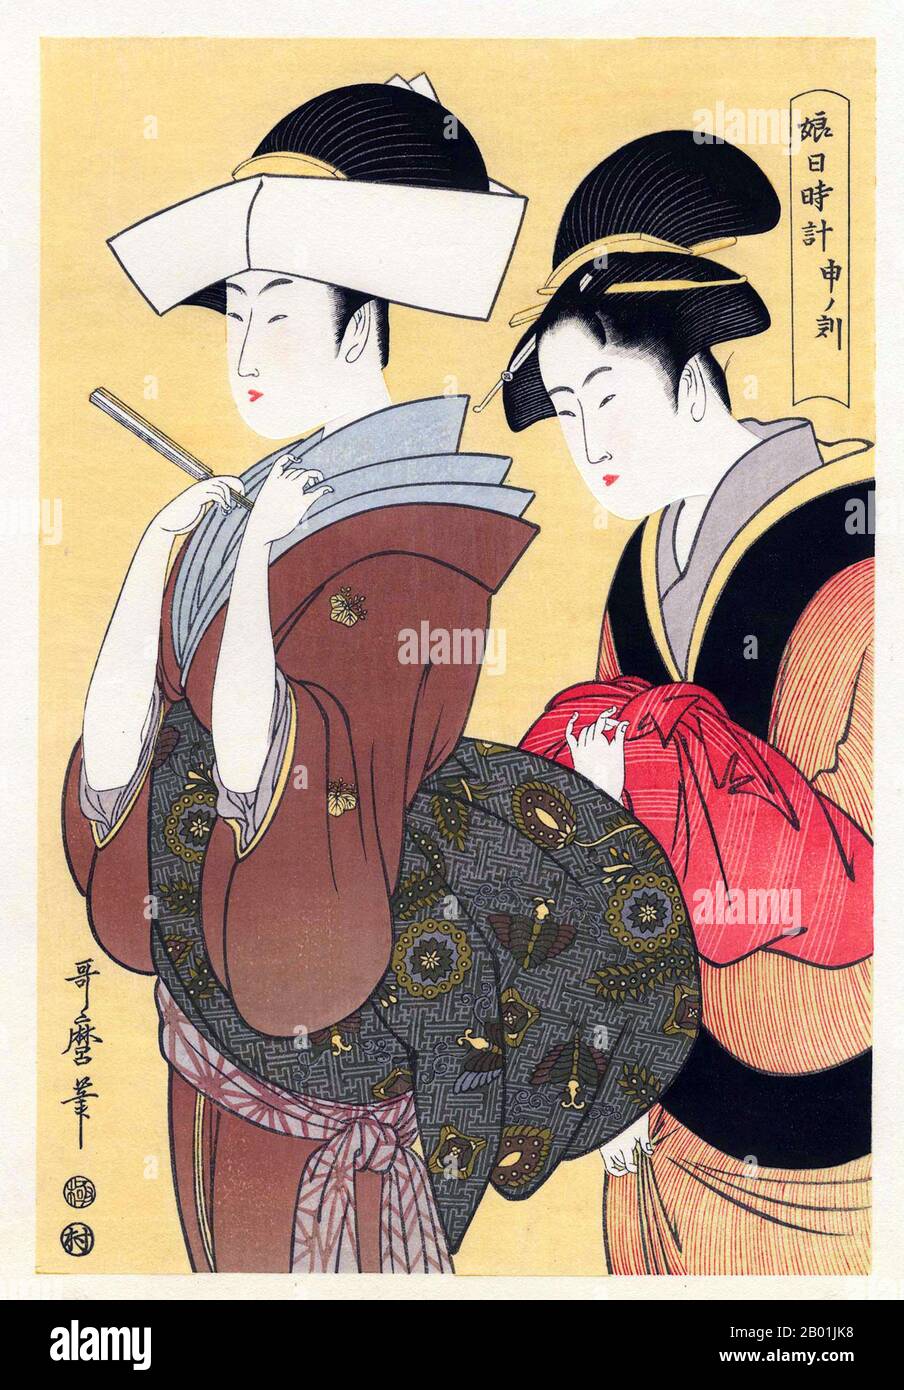 Japan: 'Hour of the Monkey'. Ukiyo-e woodblock print from the series 'Twelve Hours of the Green Houses' by Kitagawa Utamaro (c. 1753 - 31 October 1806), 1794.  Kitagawa Utamaro was a Japanese printmaker and painter, who is considered one of the greatest artists of woodblock prints (ukiyo-e). He is known especially for his masterfully composed studies of women, known as bijinga. He also produced nature studies, particularly illustrated books of insects. Stock Photo